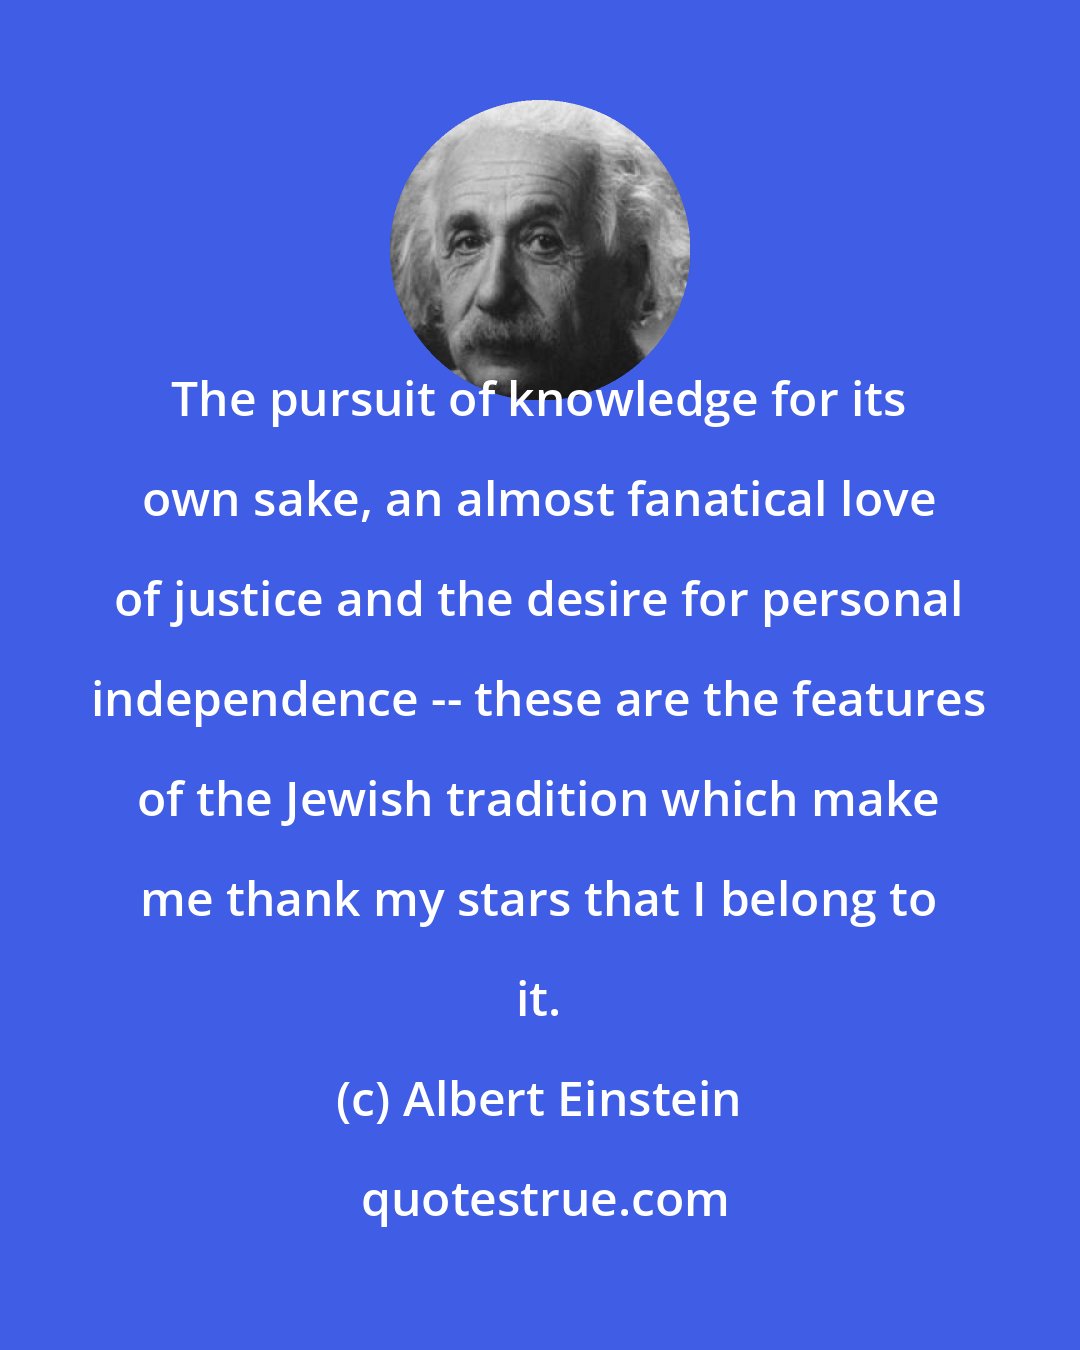 Albert Einstein: The pursuit of knowledge for its own sake, an almost fanatical love of justice and the desire for personal independence -- these are the features of the Jewish tradition which make me thank my stars that I belong to it.